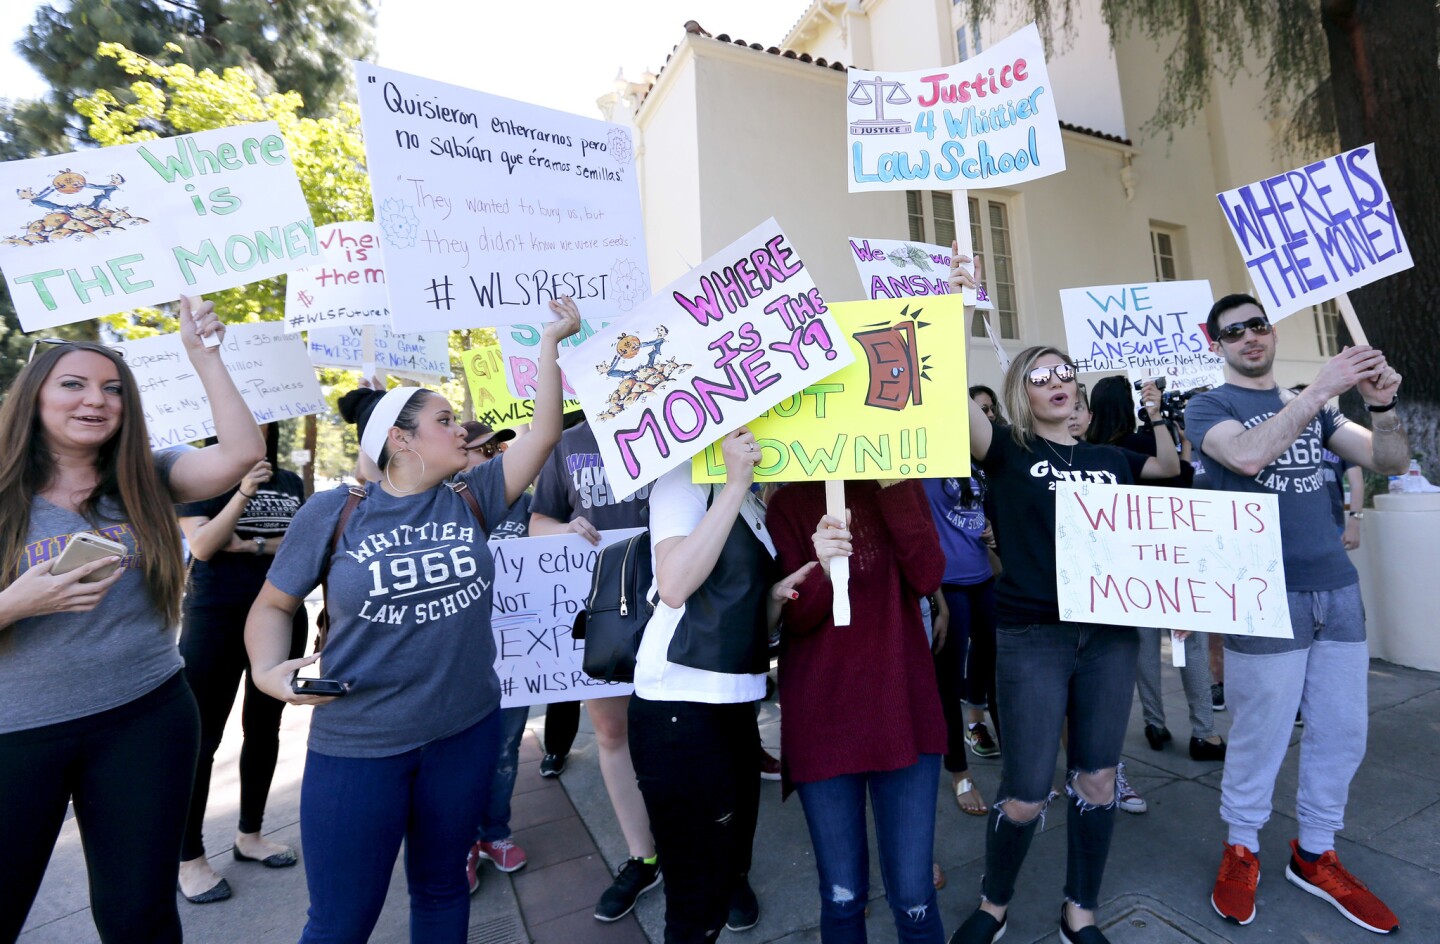 Whittier Law School students protest the closing of the Costa Mesa campus in front of Whittier College in Whittier, on Friday, April 21, 2017. The college's board of trustees recently decided to halt enrollment and close the law school in Costa Mesa.